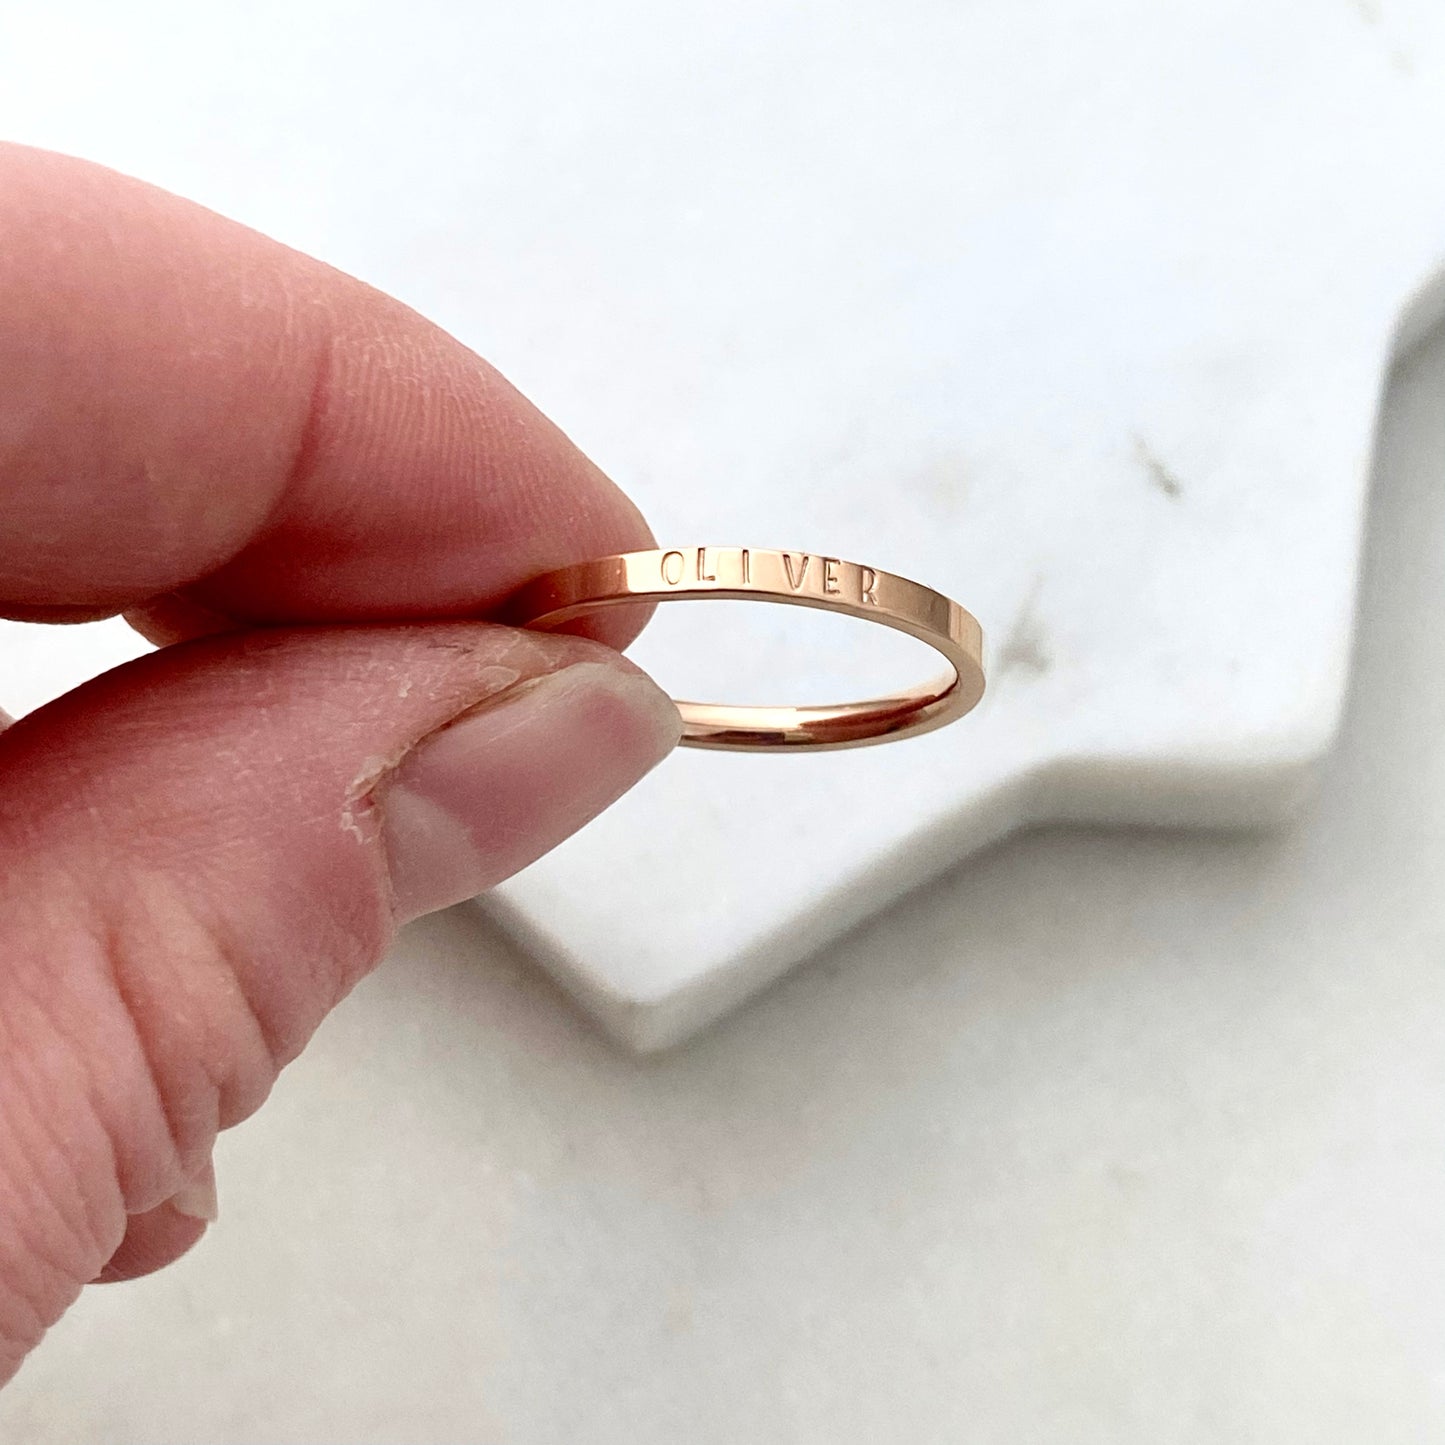 Oliver, Size 8, Rose Gold Mini Stacking Ring, Stainless Steel Jewelry, Minimalist Rings, Waterproof Jewelry, Dainty Ring, Stacking Ring Set Rings callistafaye   